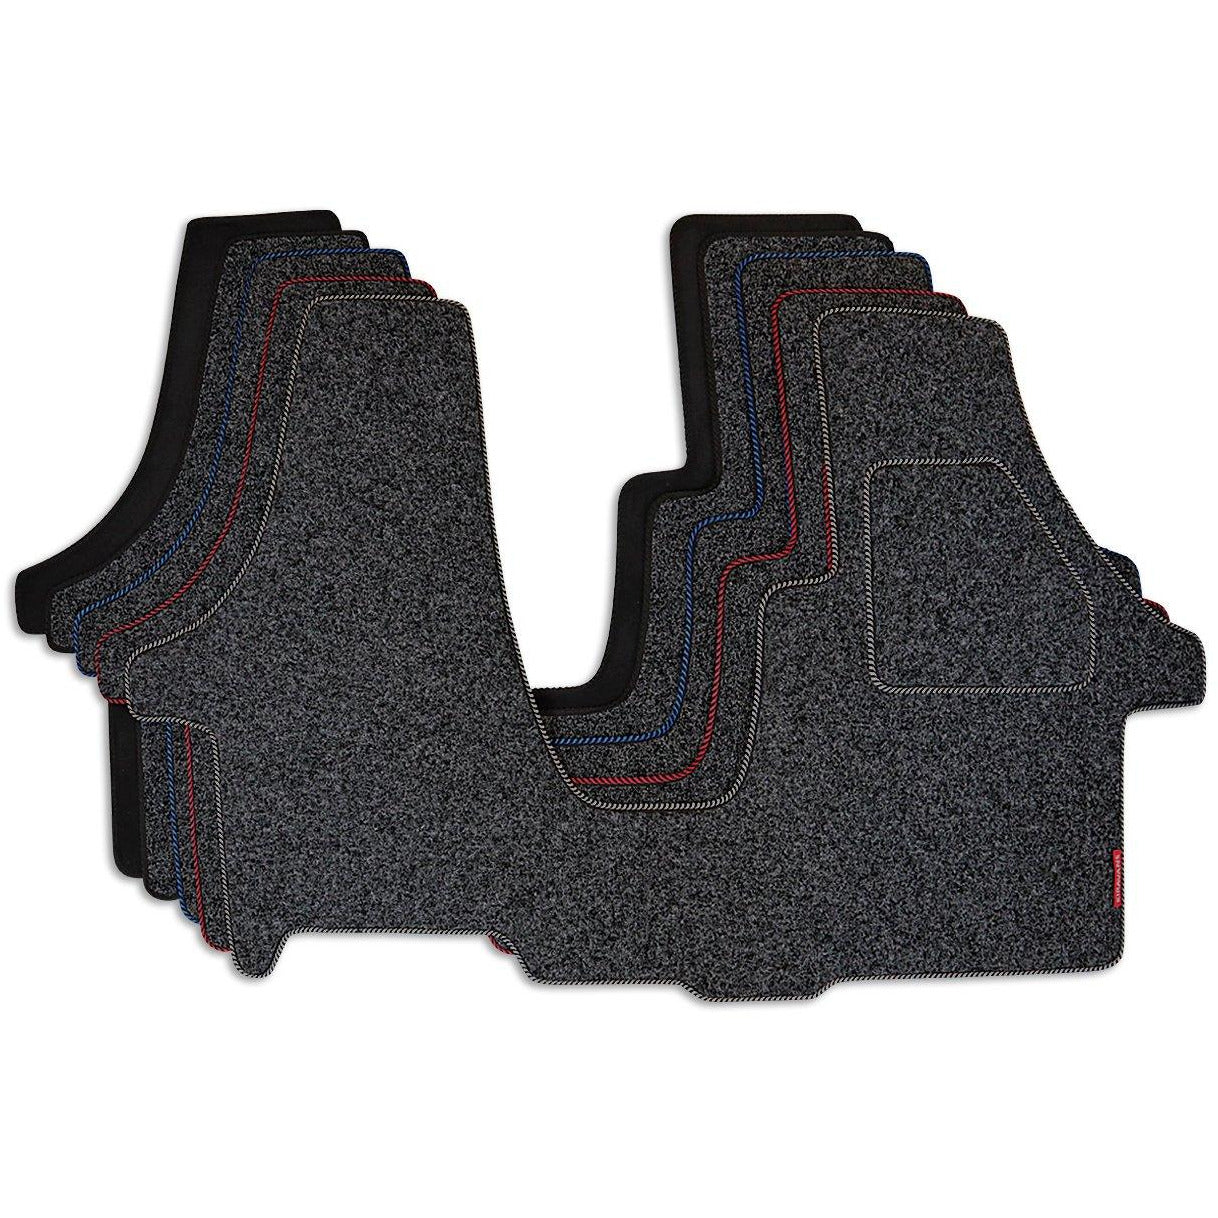 Cab Mat - For the VW T5/T6 Double Seat Swivel (Right Hand Drive) Designed by Kiravans 